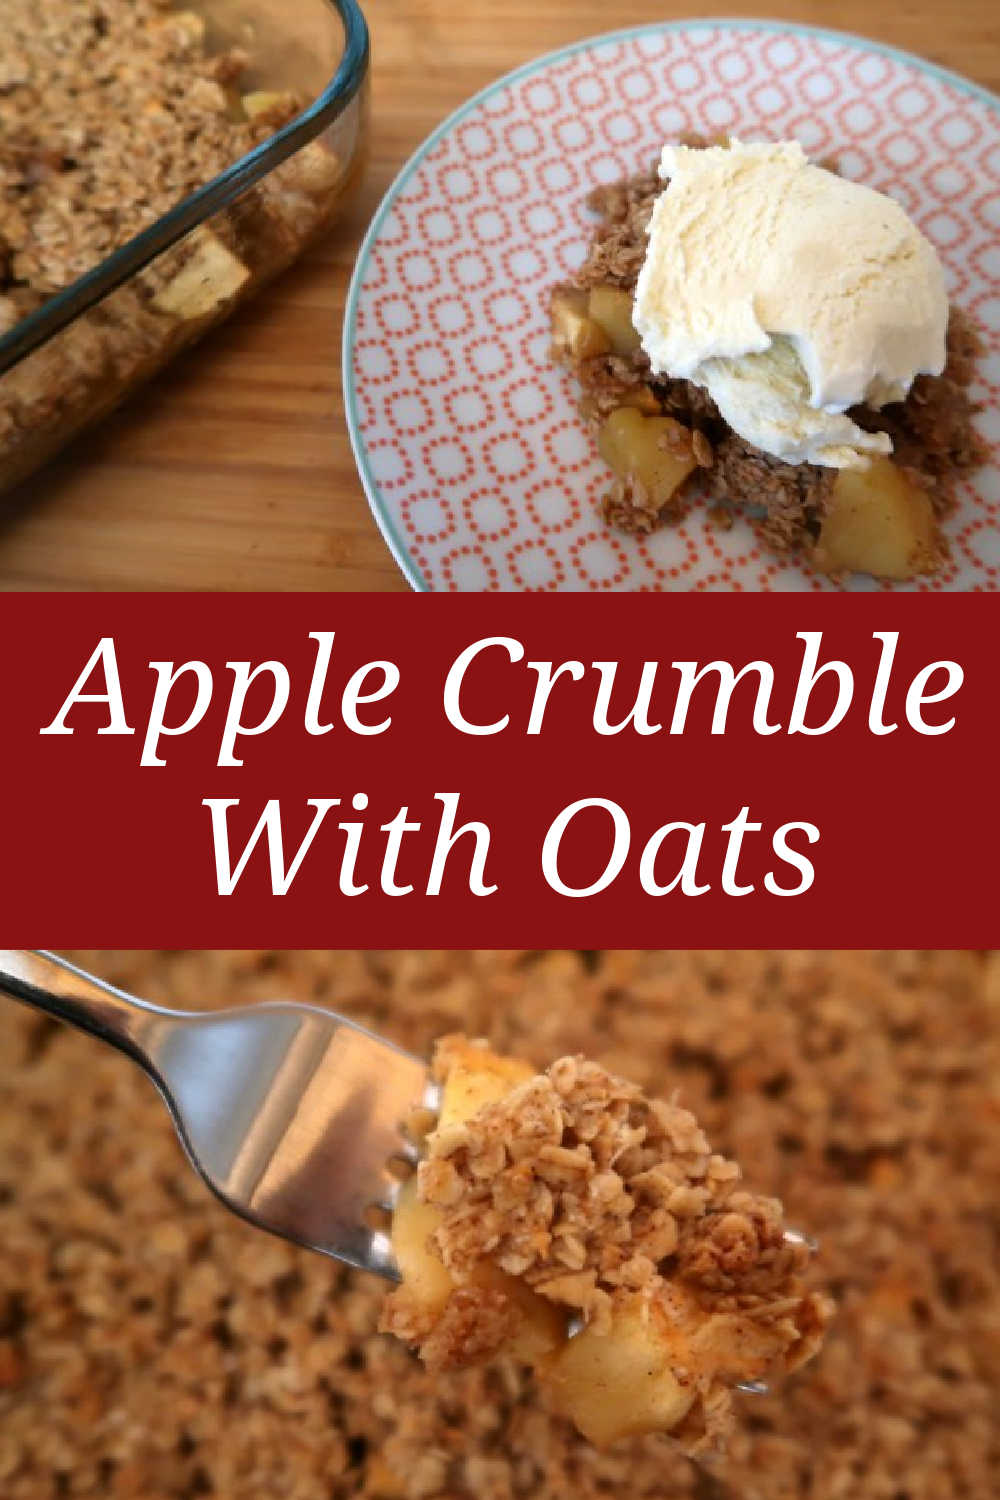 Easy Apple Crumble With Oats Recipe - How to make a quick and simple gluten free apple crumble dessert with an oat topping without flour.